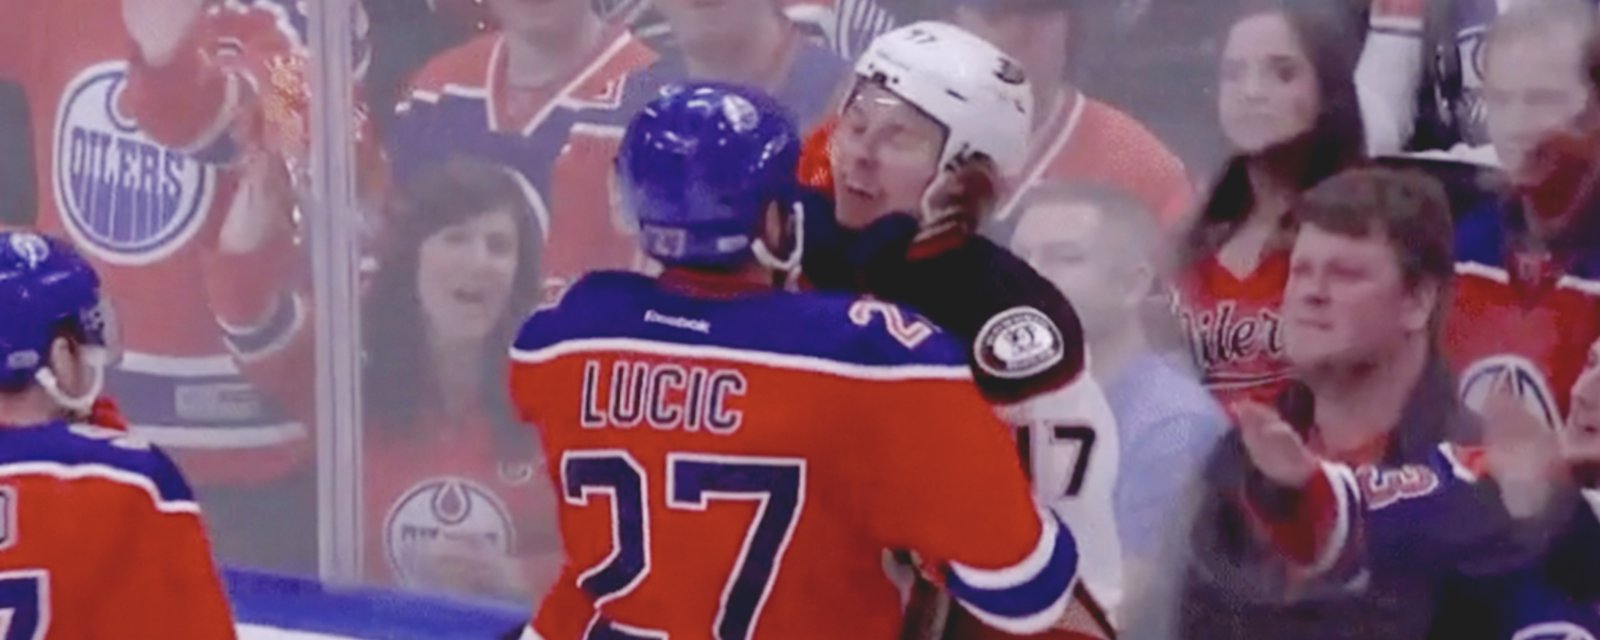 ICYMI: Watch Milan Lucic trying to choke one opponent in game 3.